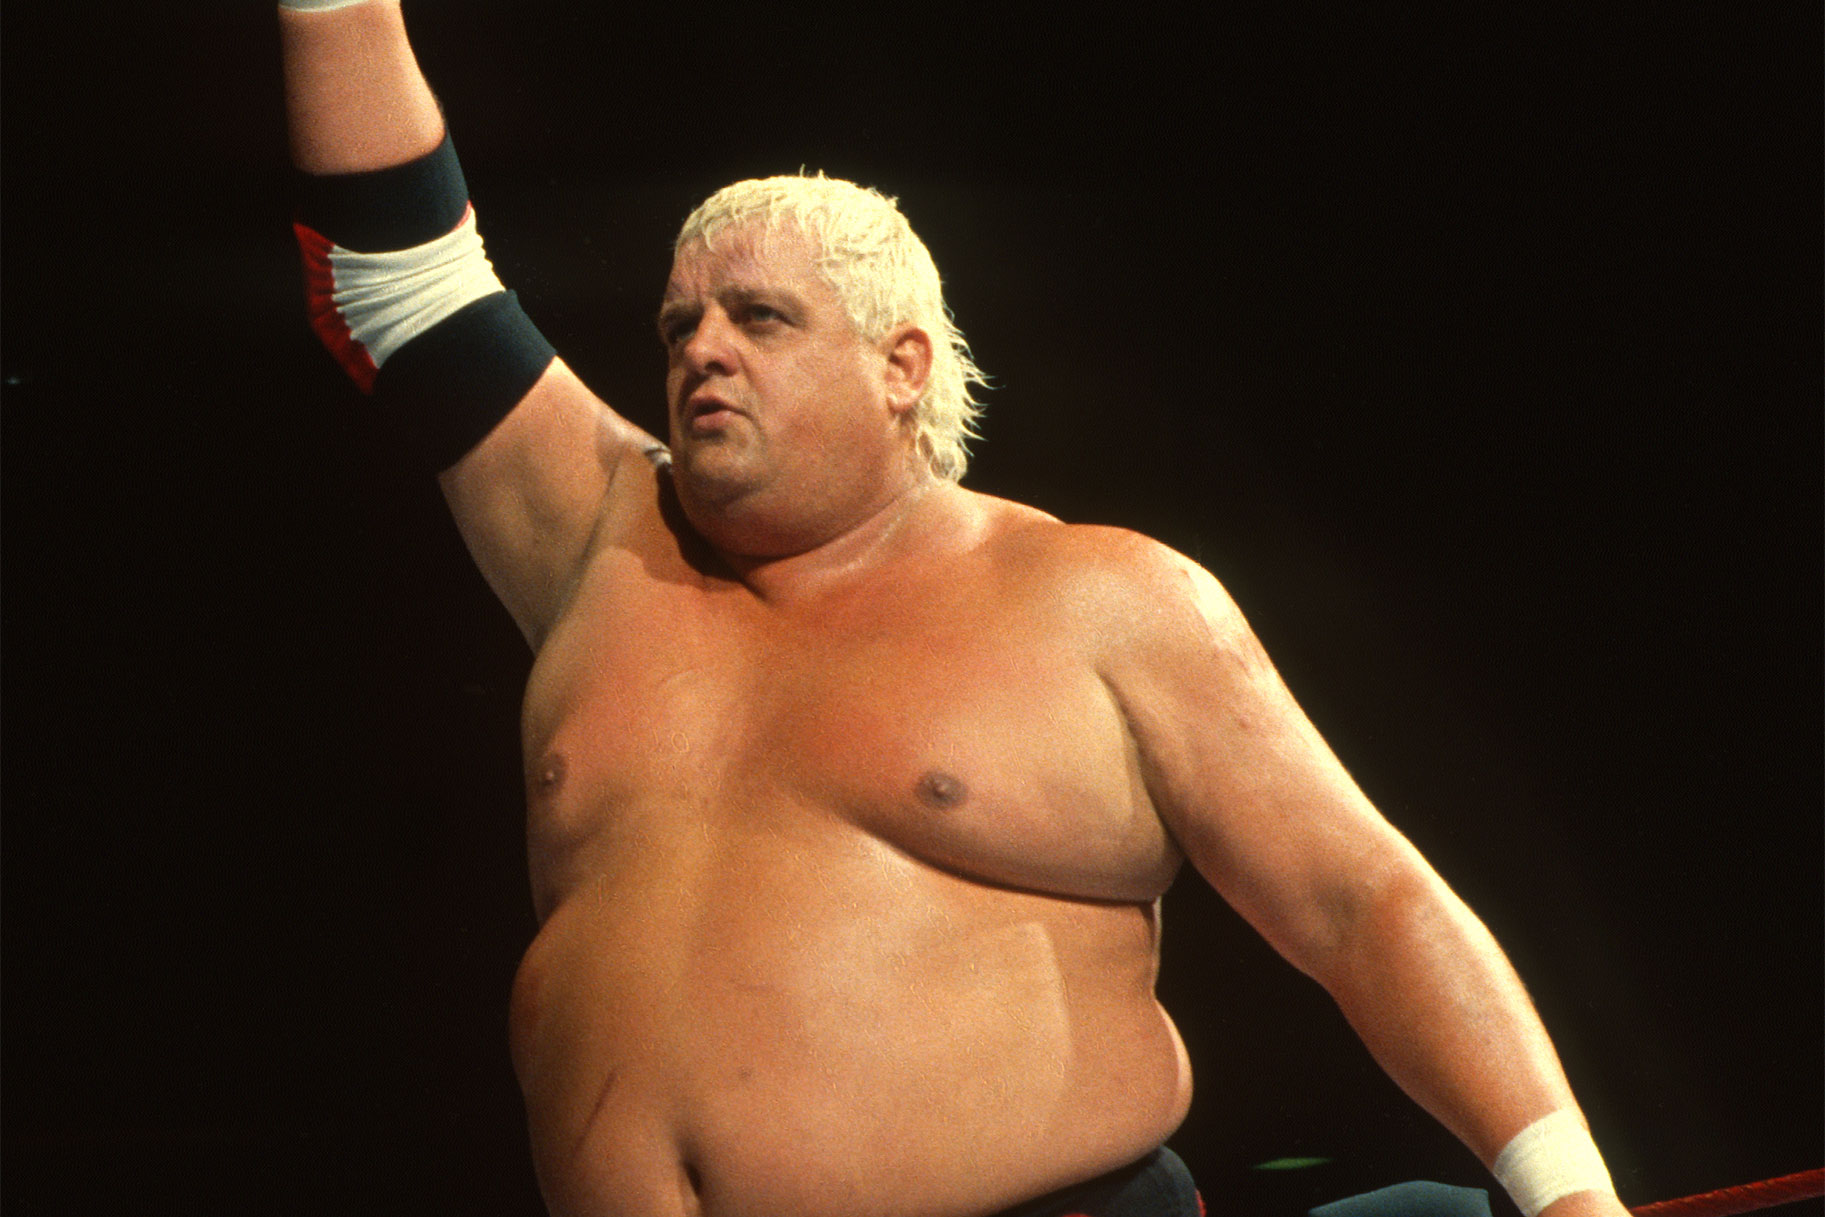 The Mysterious And Tragic Death Of Dusty Rhodes